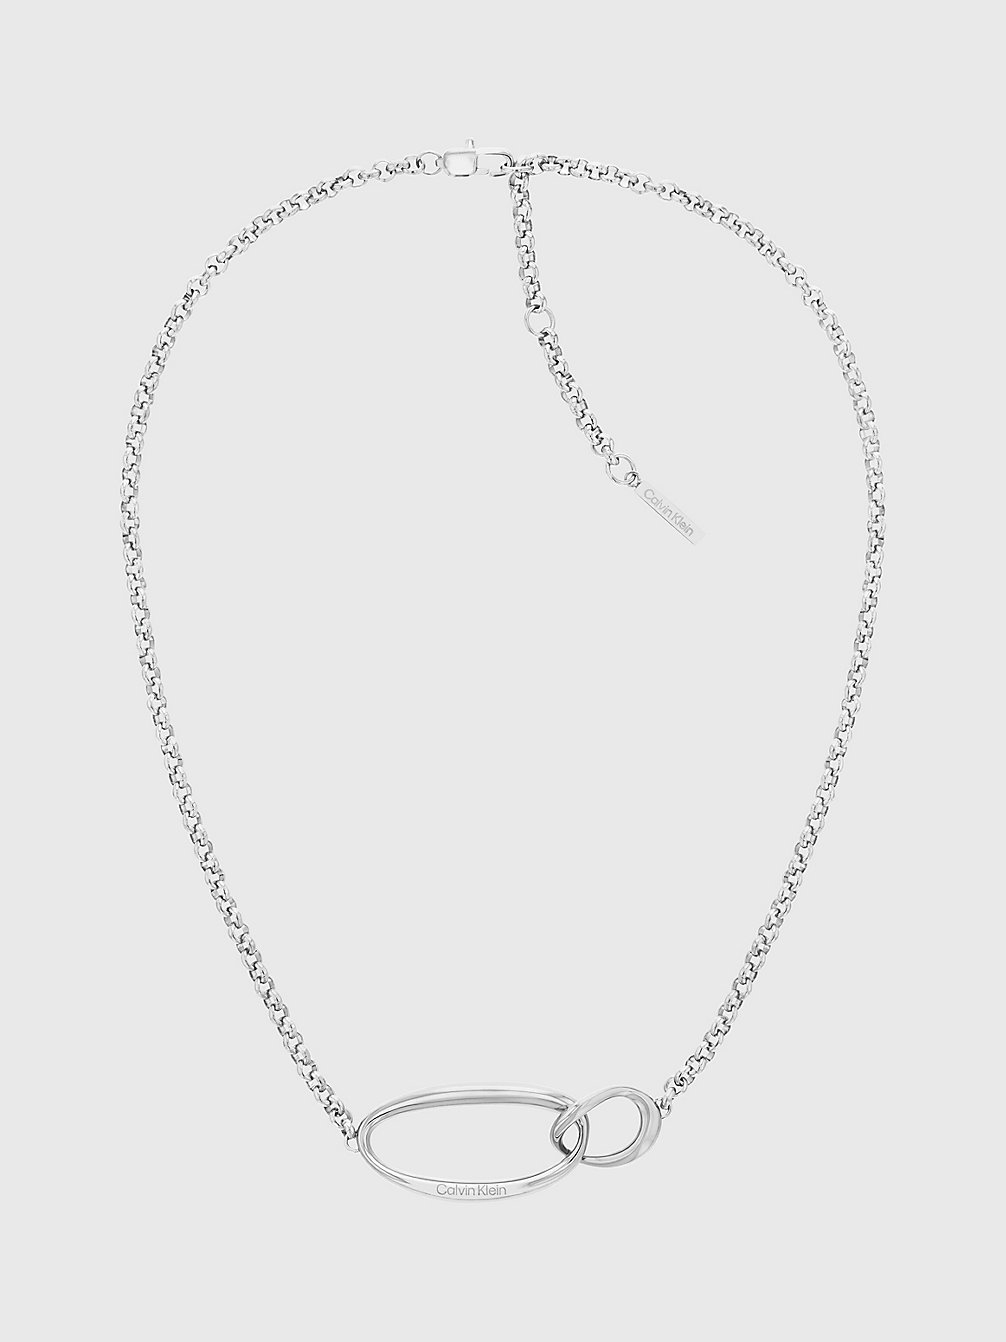 SILVER Collier - Playful Organic Shapes undefined femmes Calvin Klein